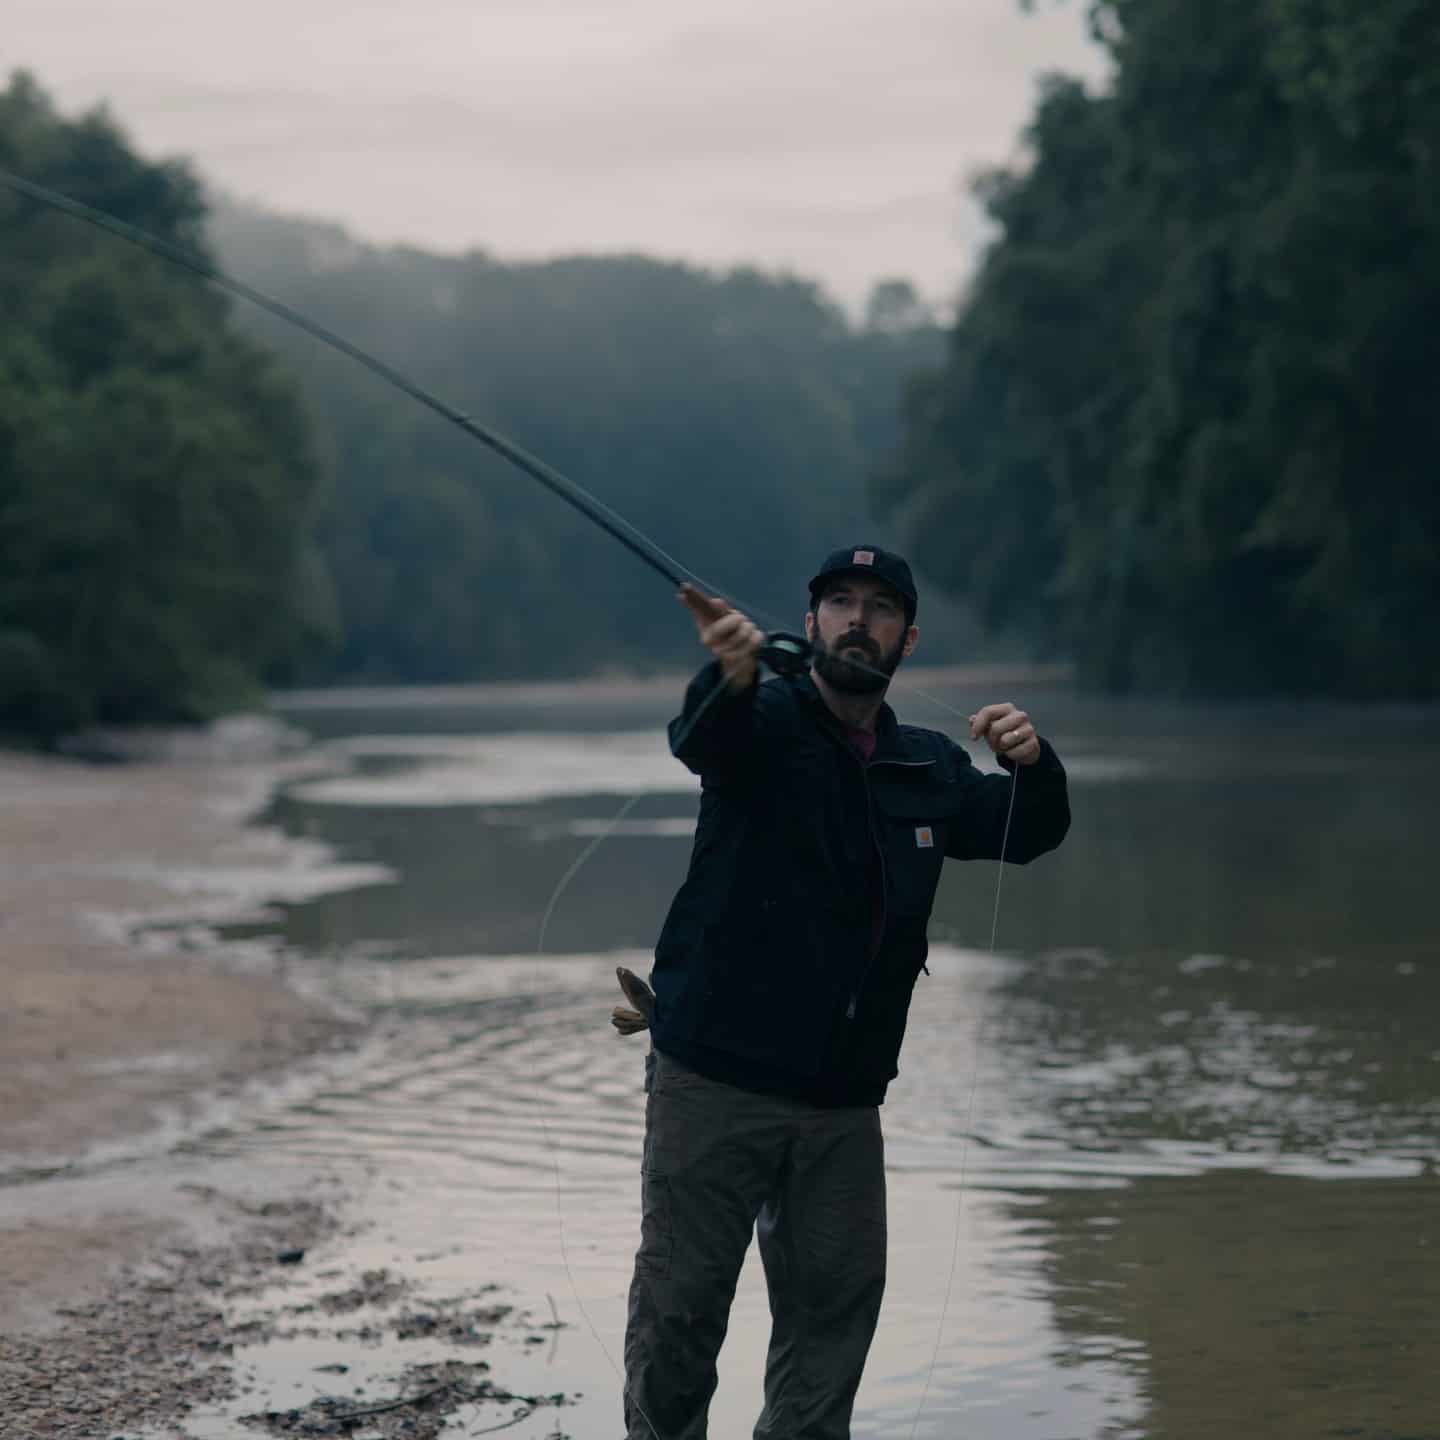 man casting a fishing line into the river